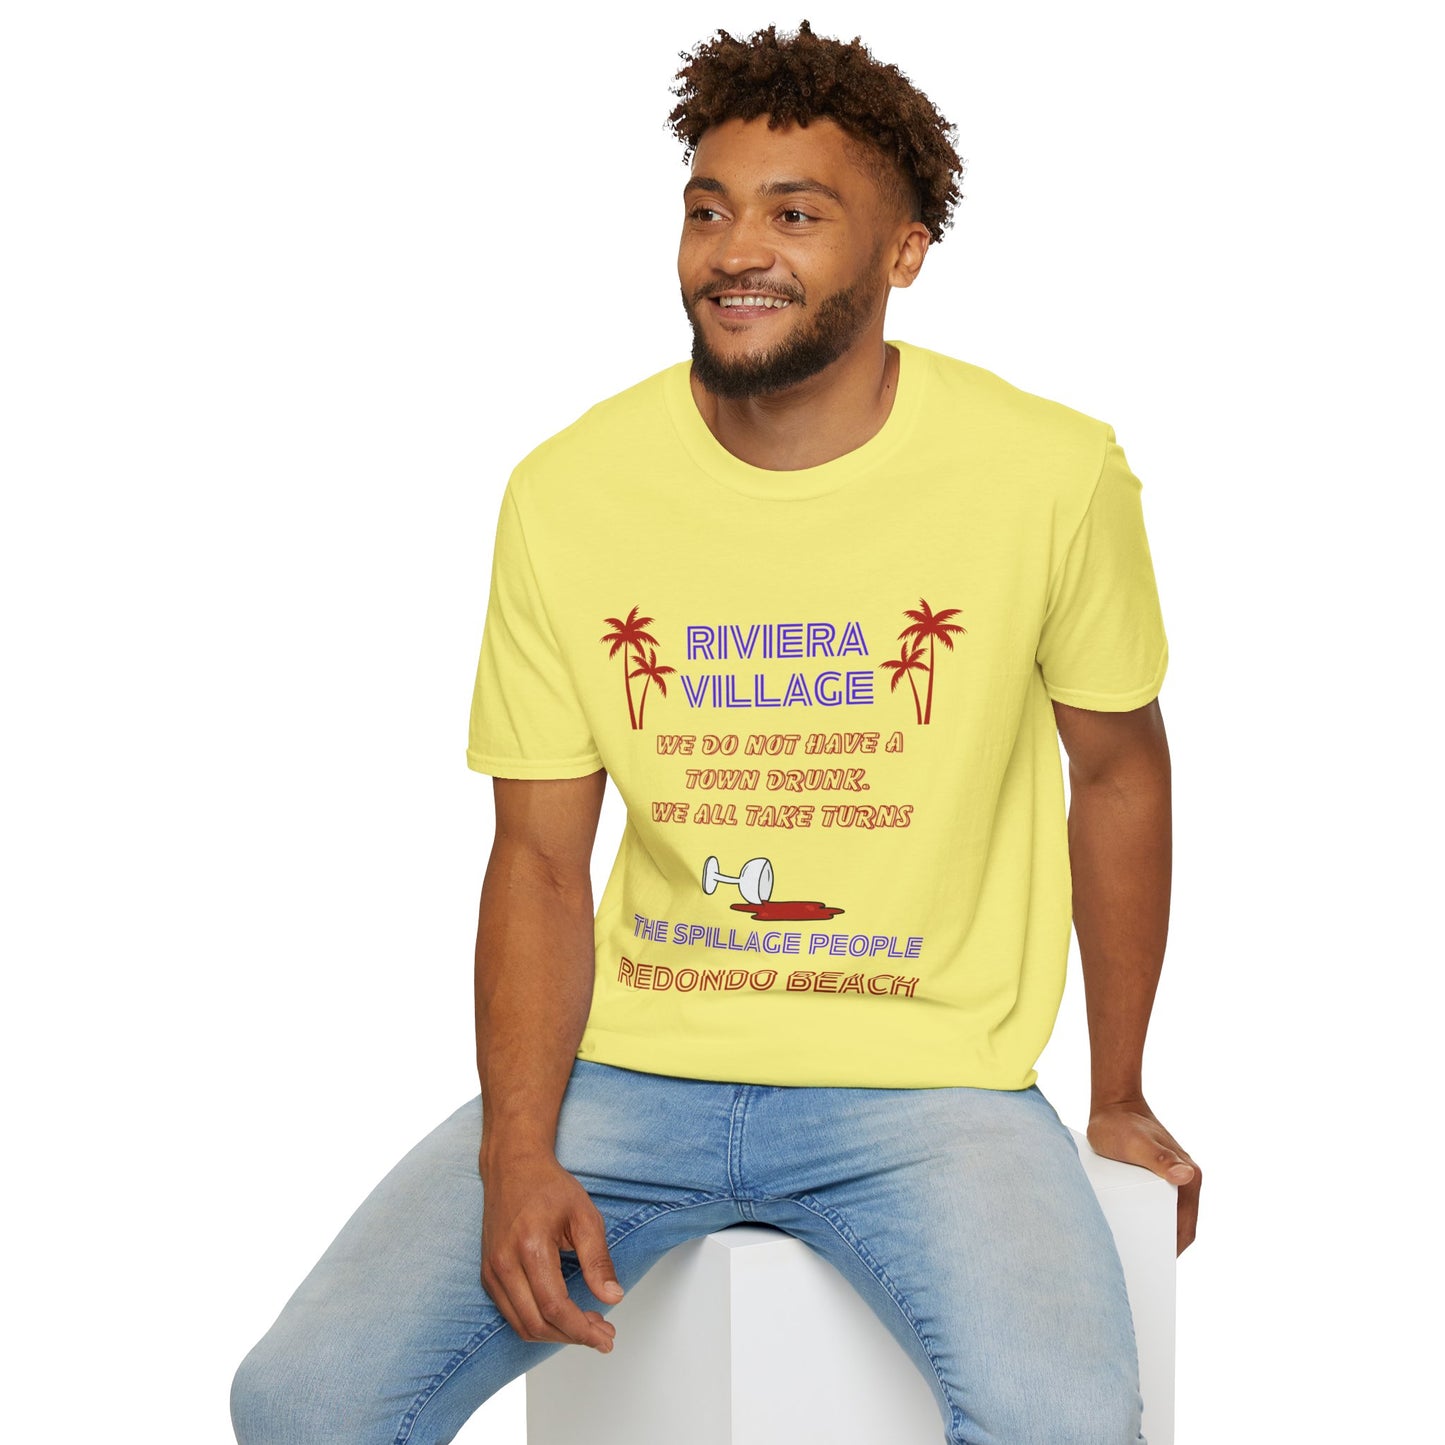 Riviera Village Redondo Beach - The Spillage People - Mens and Womans  Softstyle T-Shirt